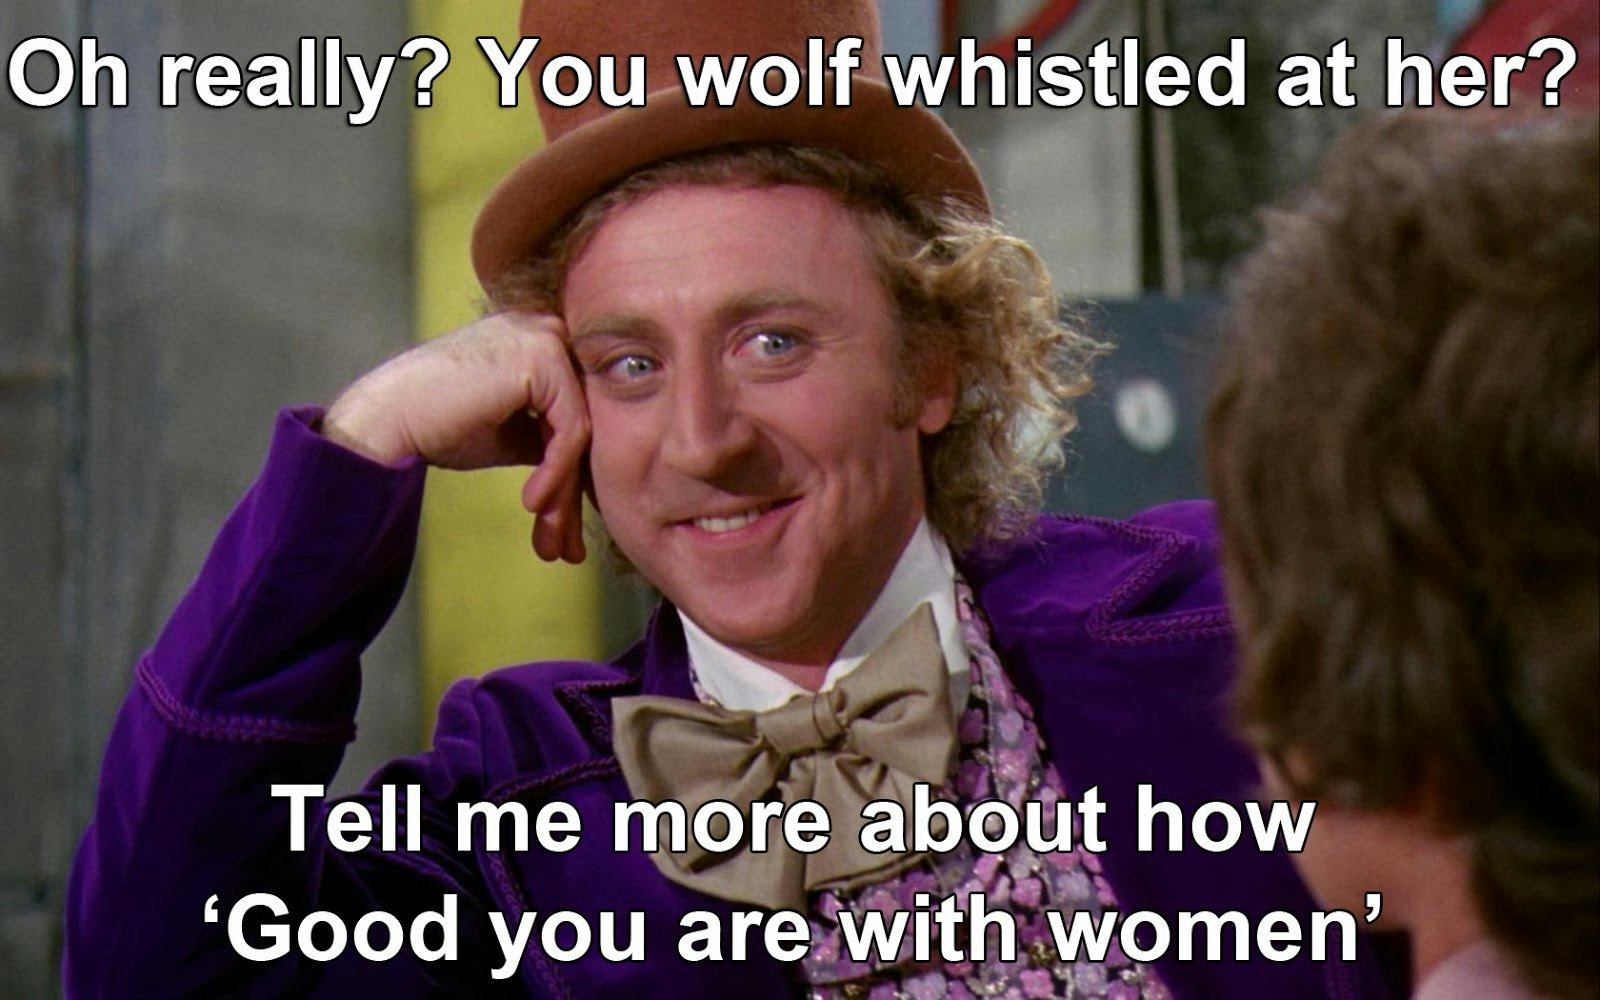 Gene Wilders Willy Wonka Meme Actually Can Double As A Perfect